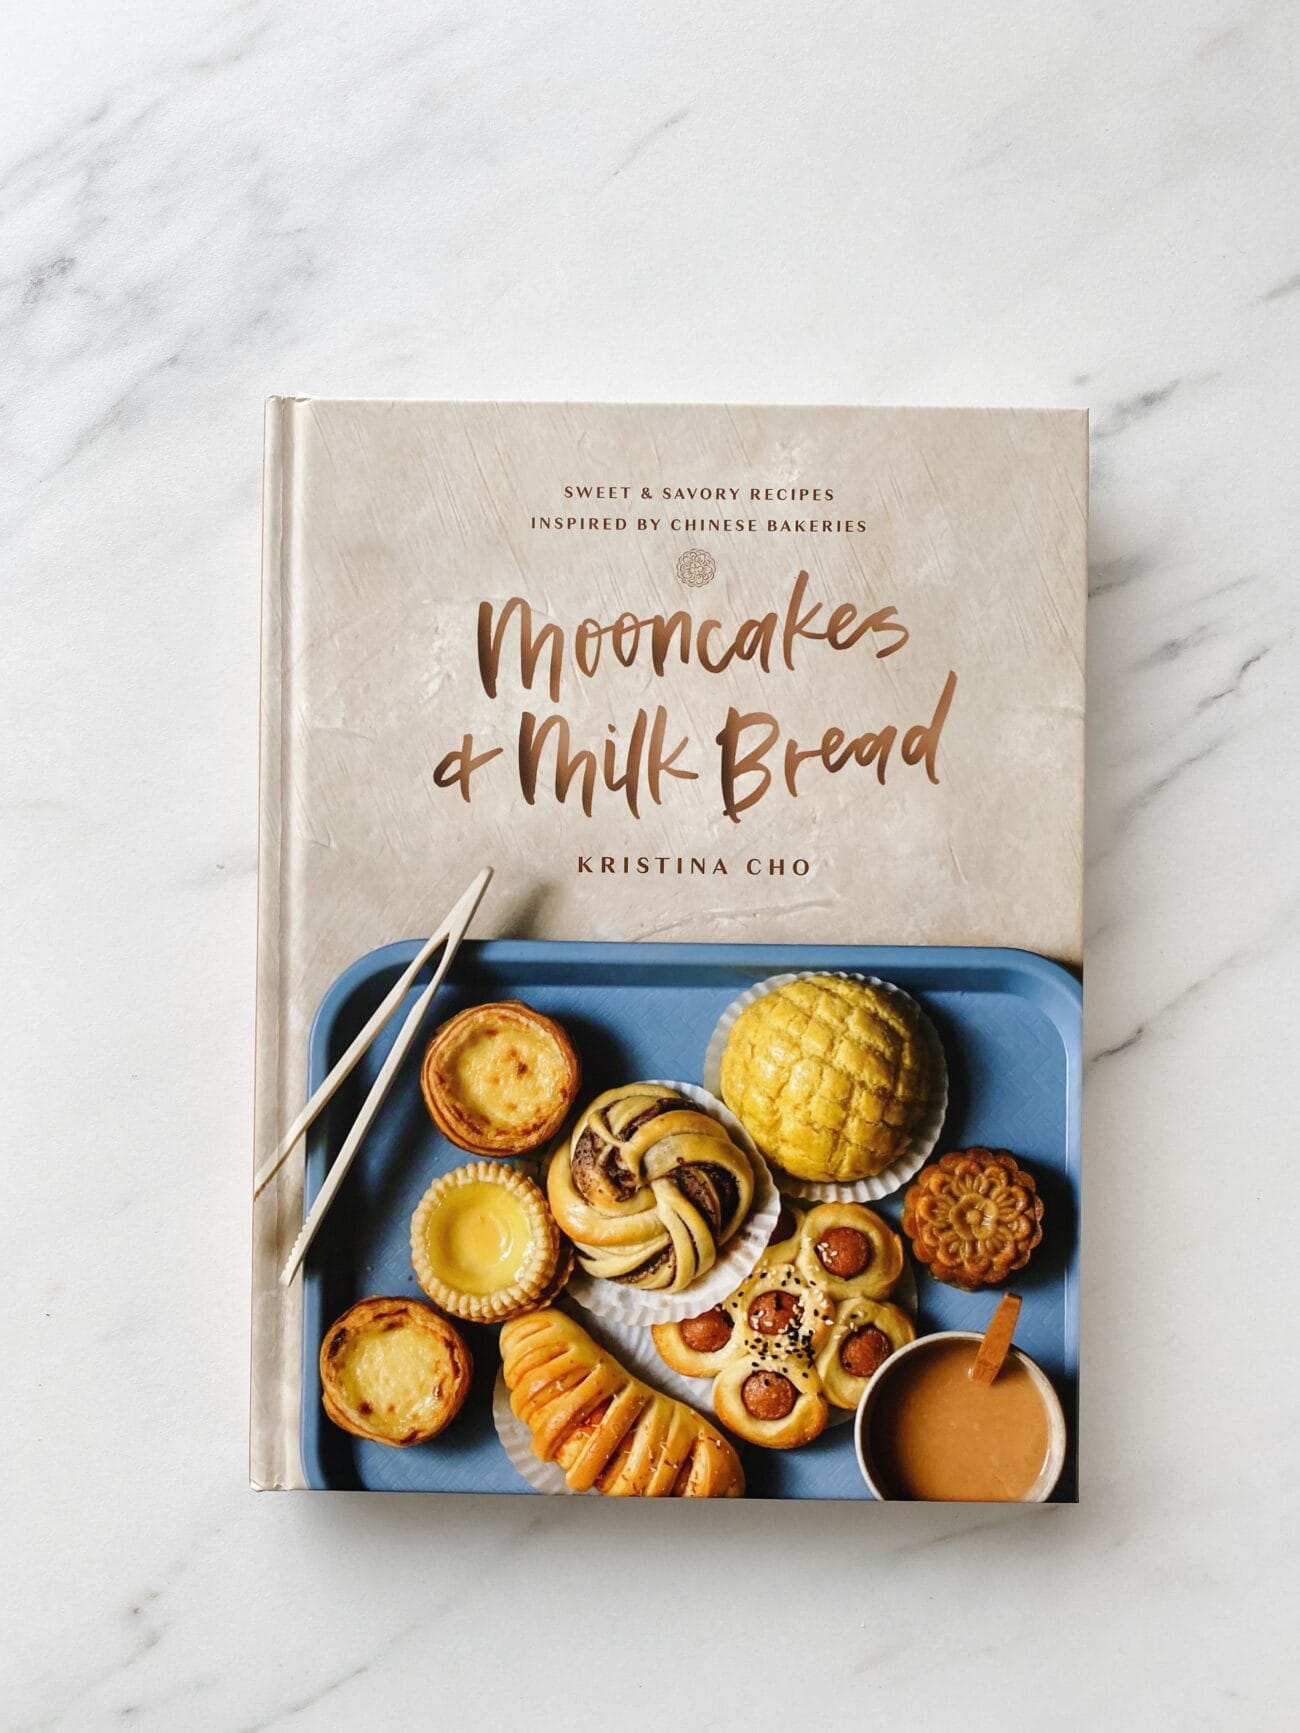 Mooncakes and Milk Bread cookbook on a marble surface